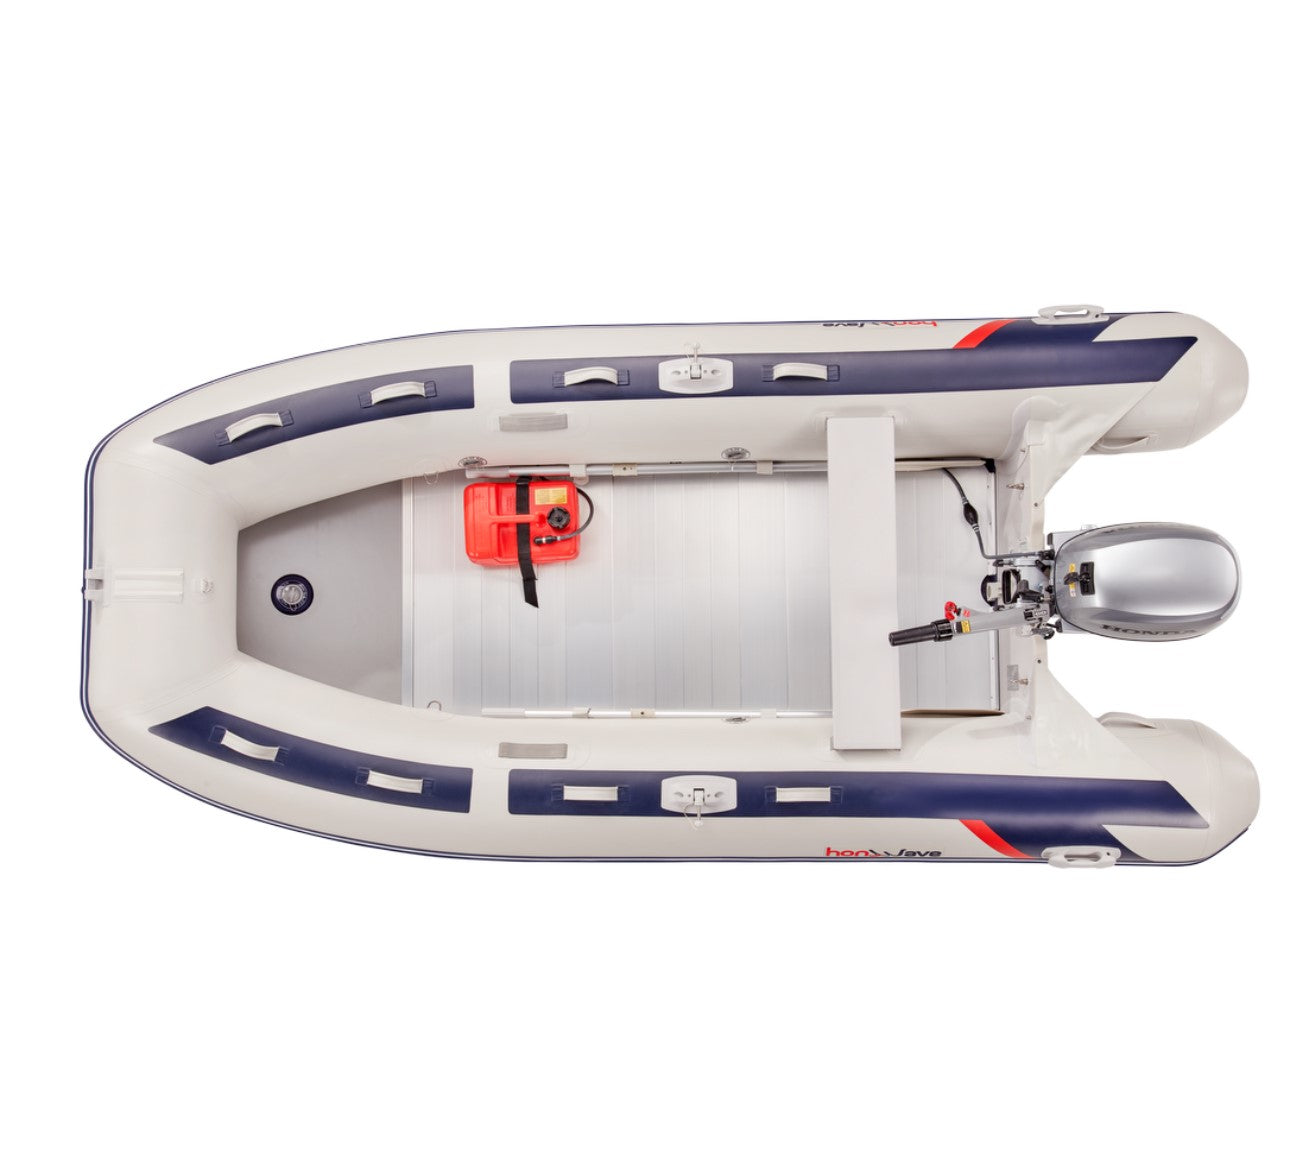 Honwave T35 3.5m Inflatable Dinghy Tender Boat with Aluminium Floor